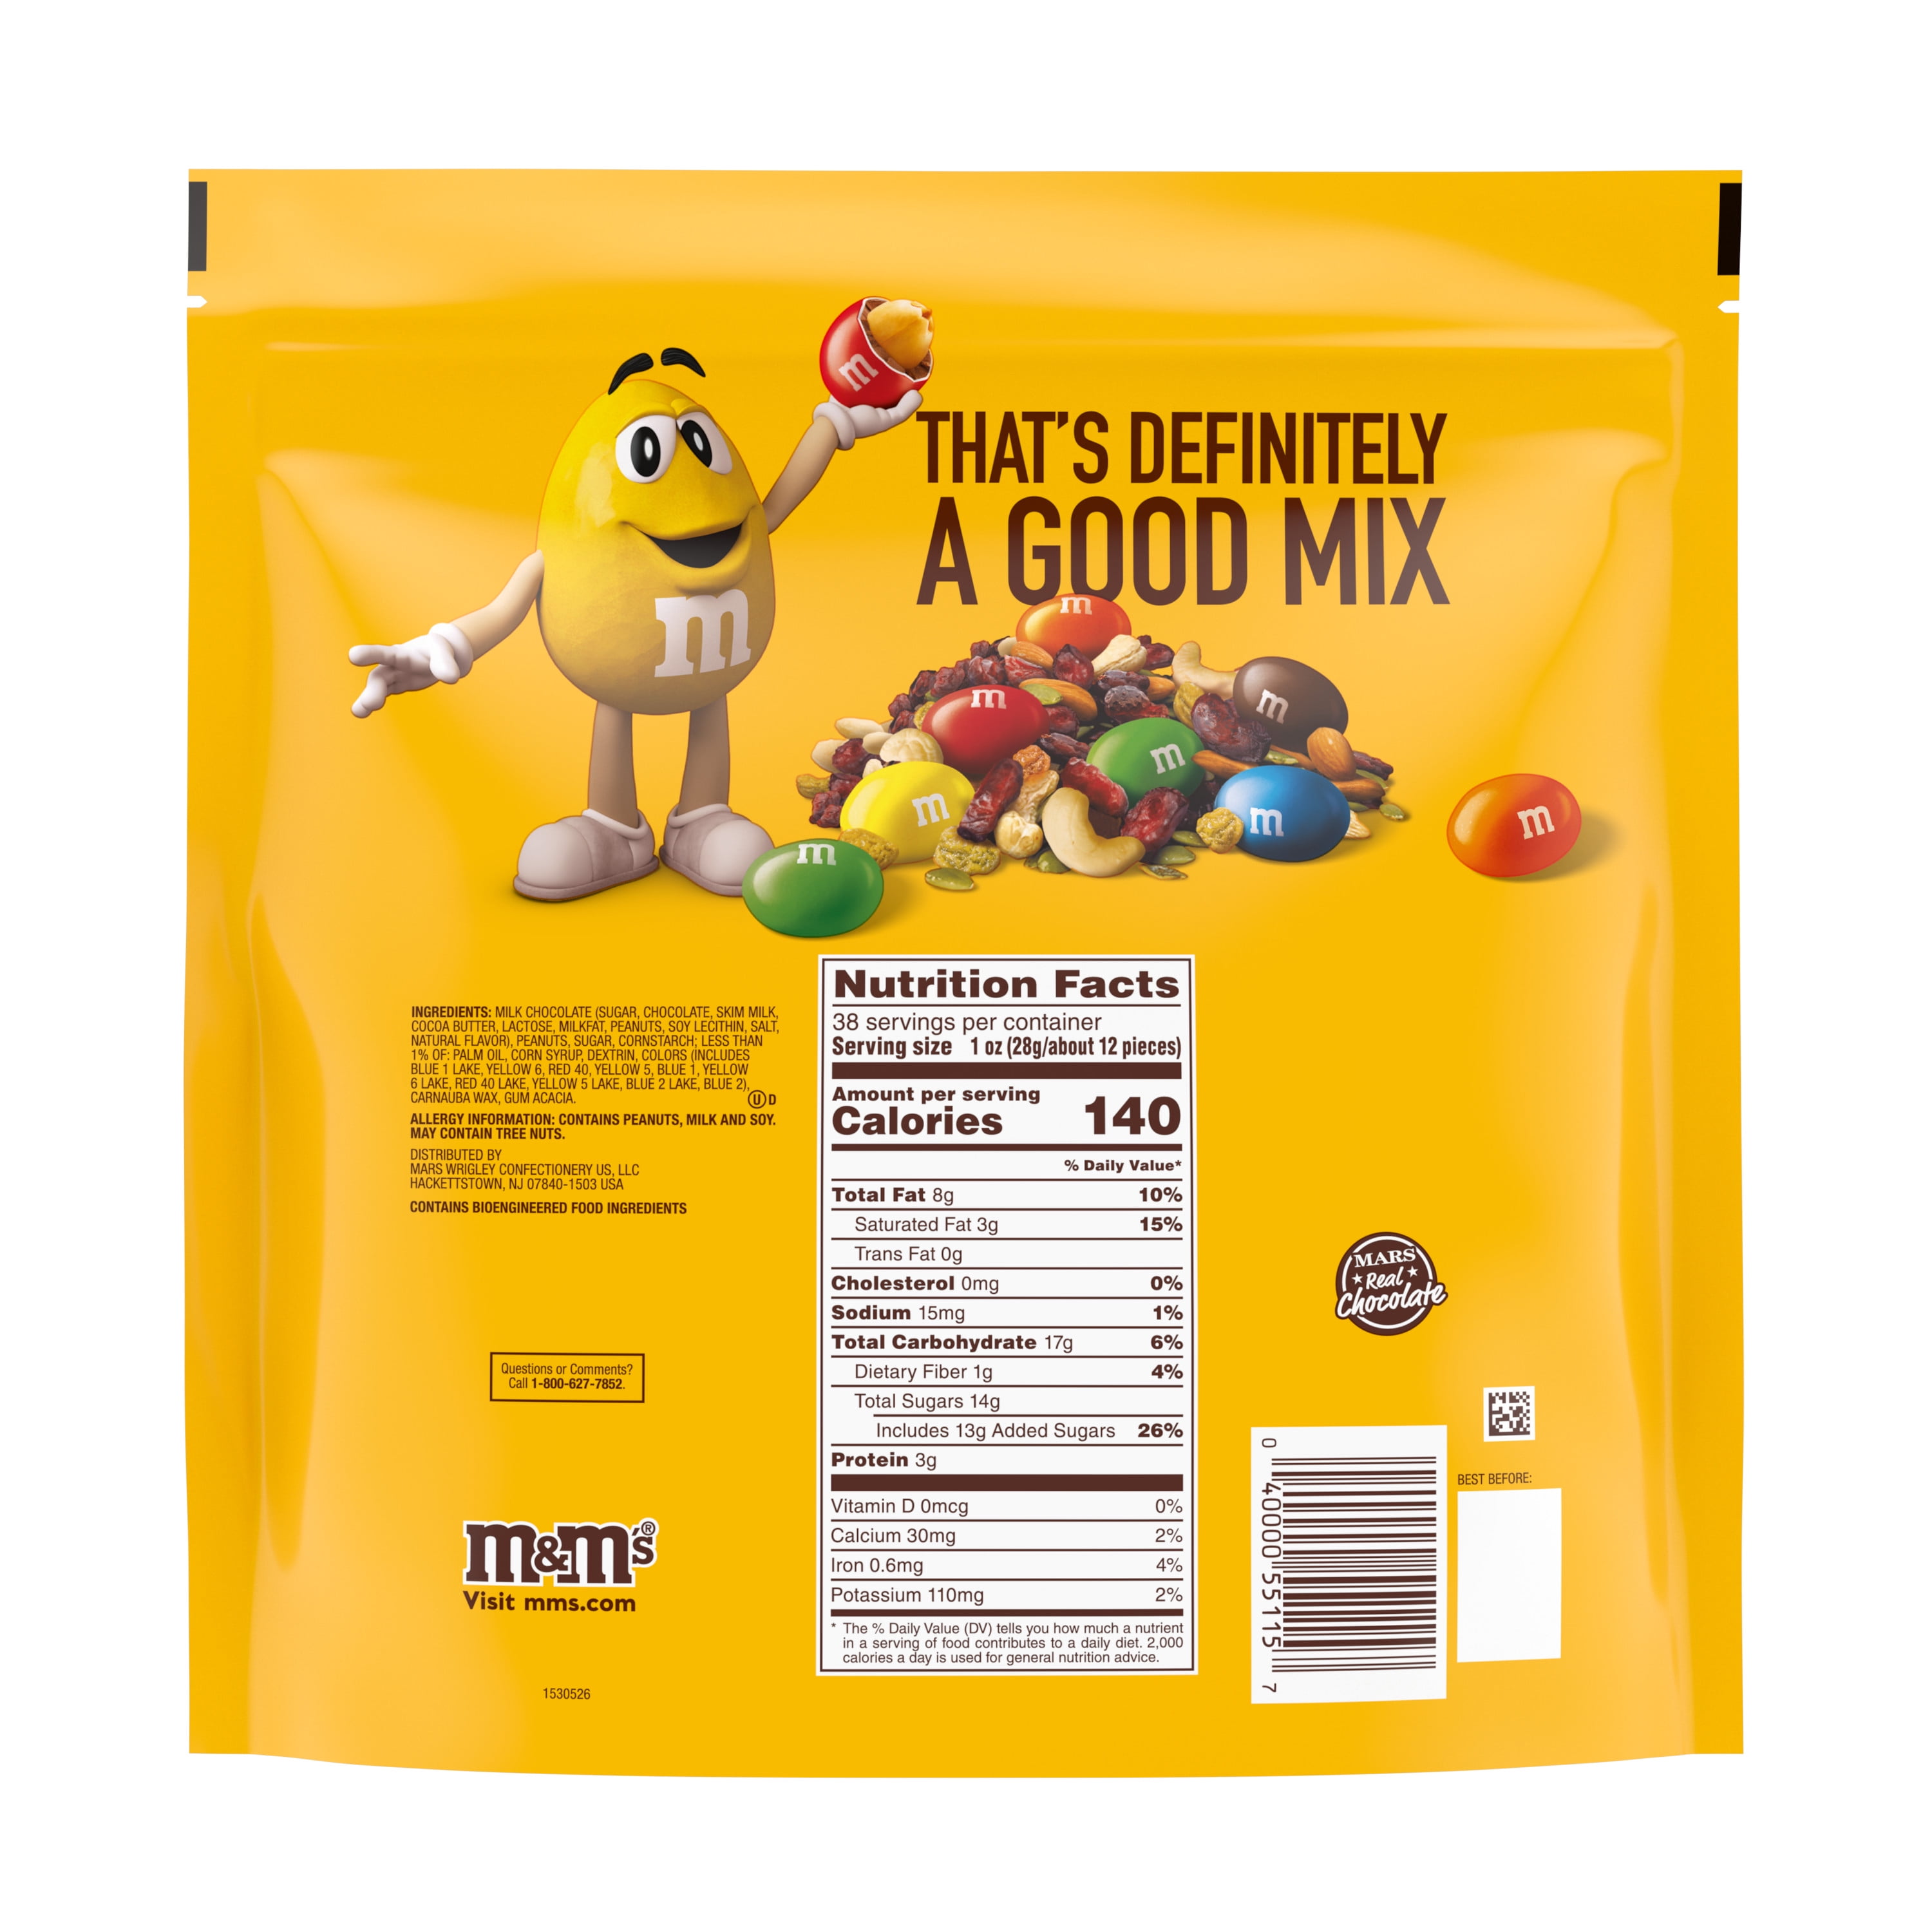  M&M's Peanut Party Size Giant (2lb 6oz Bag) Resealable :  Grocery & Gourmet Food